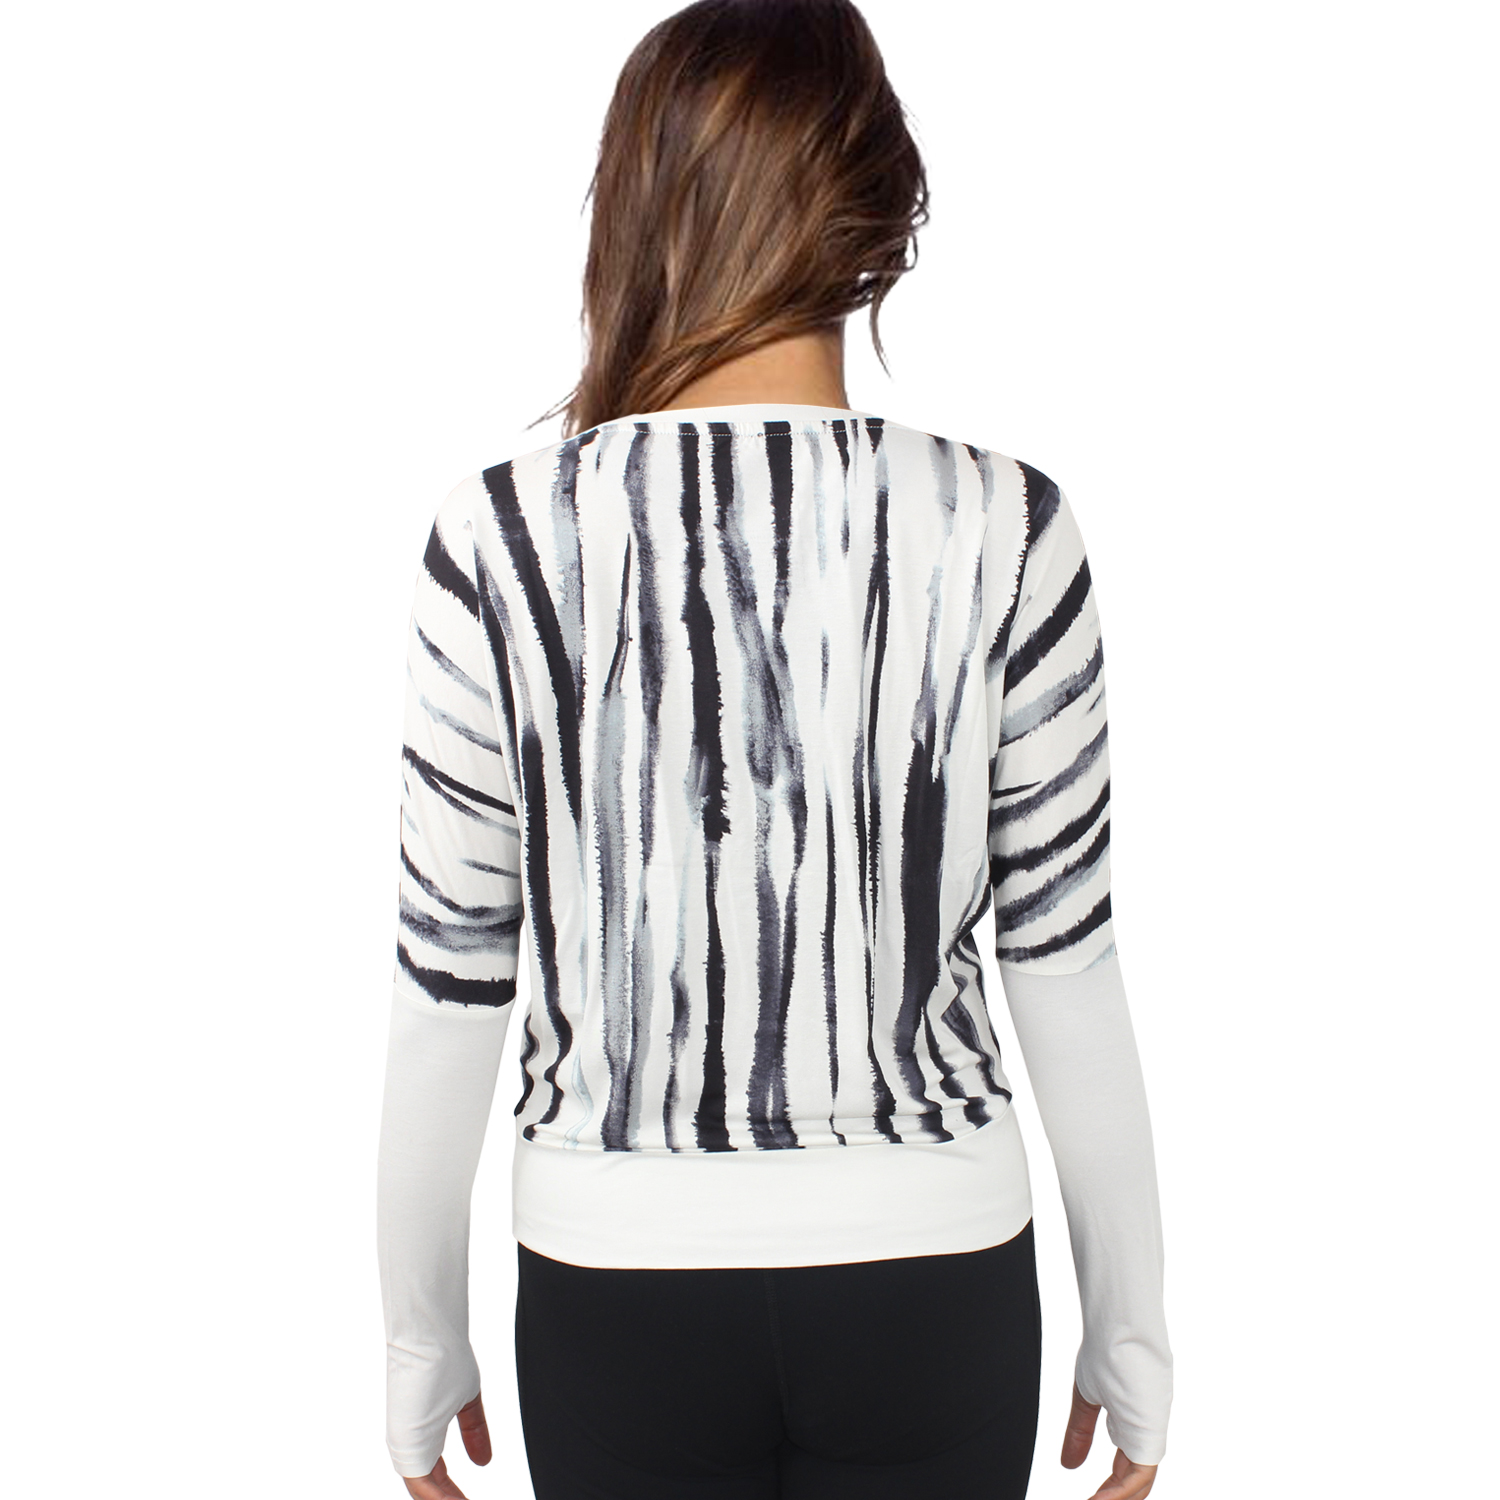 Women's Casual Batwing Sleeve Pullover Stripes Slim Fit Yoga Top Shirt